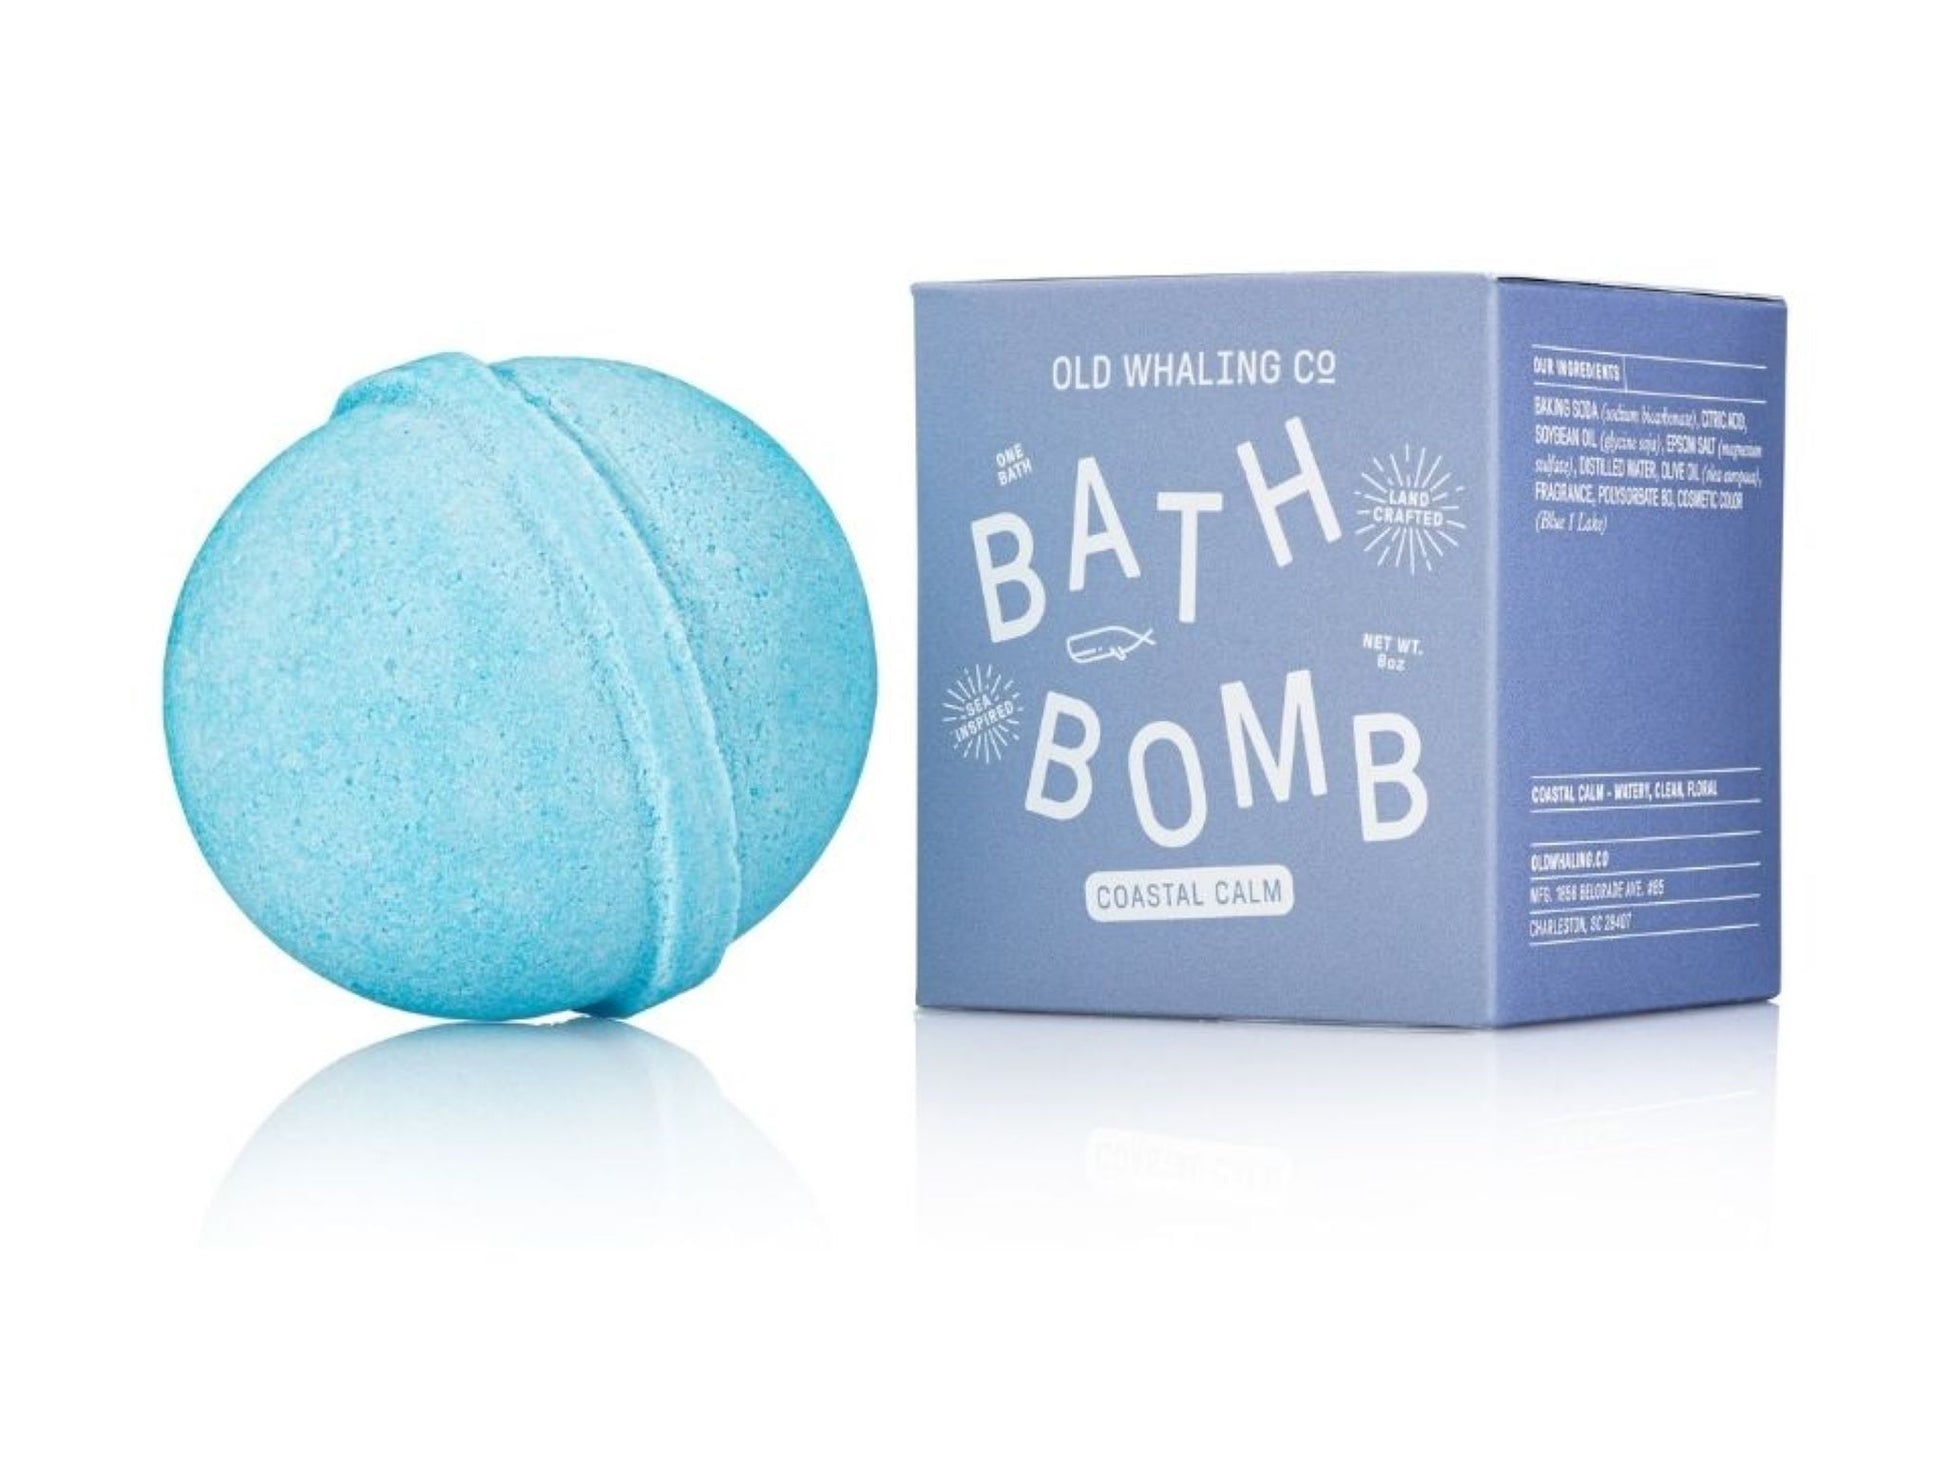 Old Whaling Company bath bomb costal calm fragence